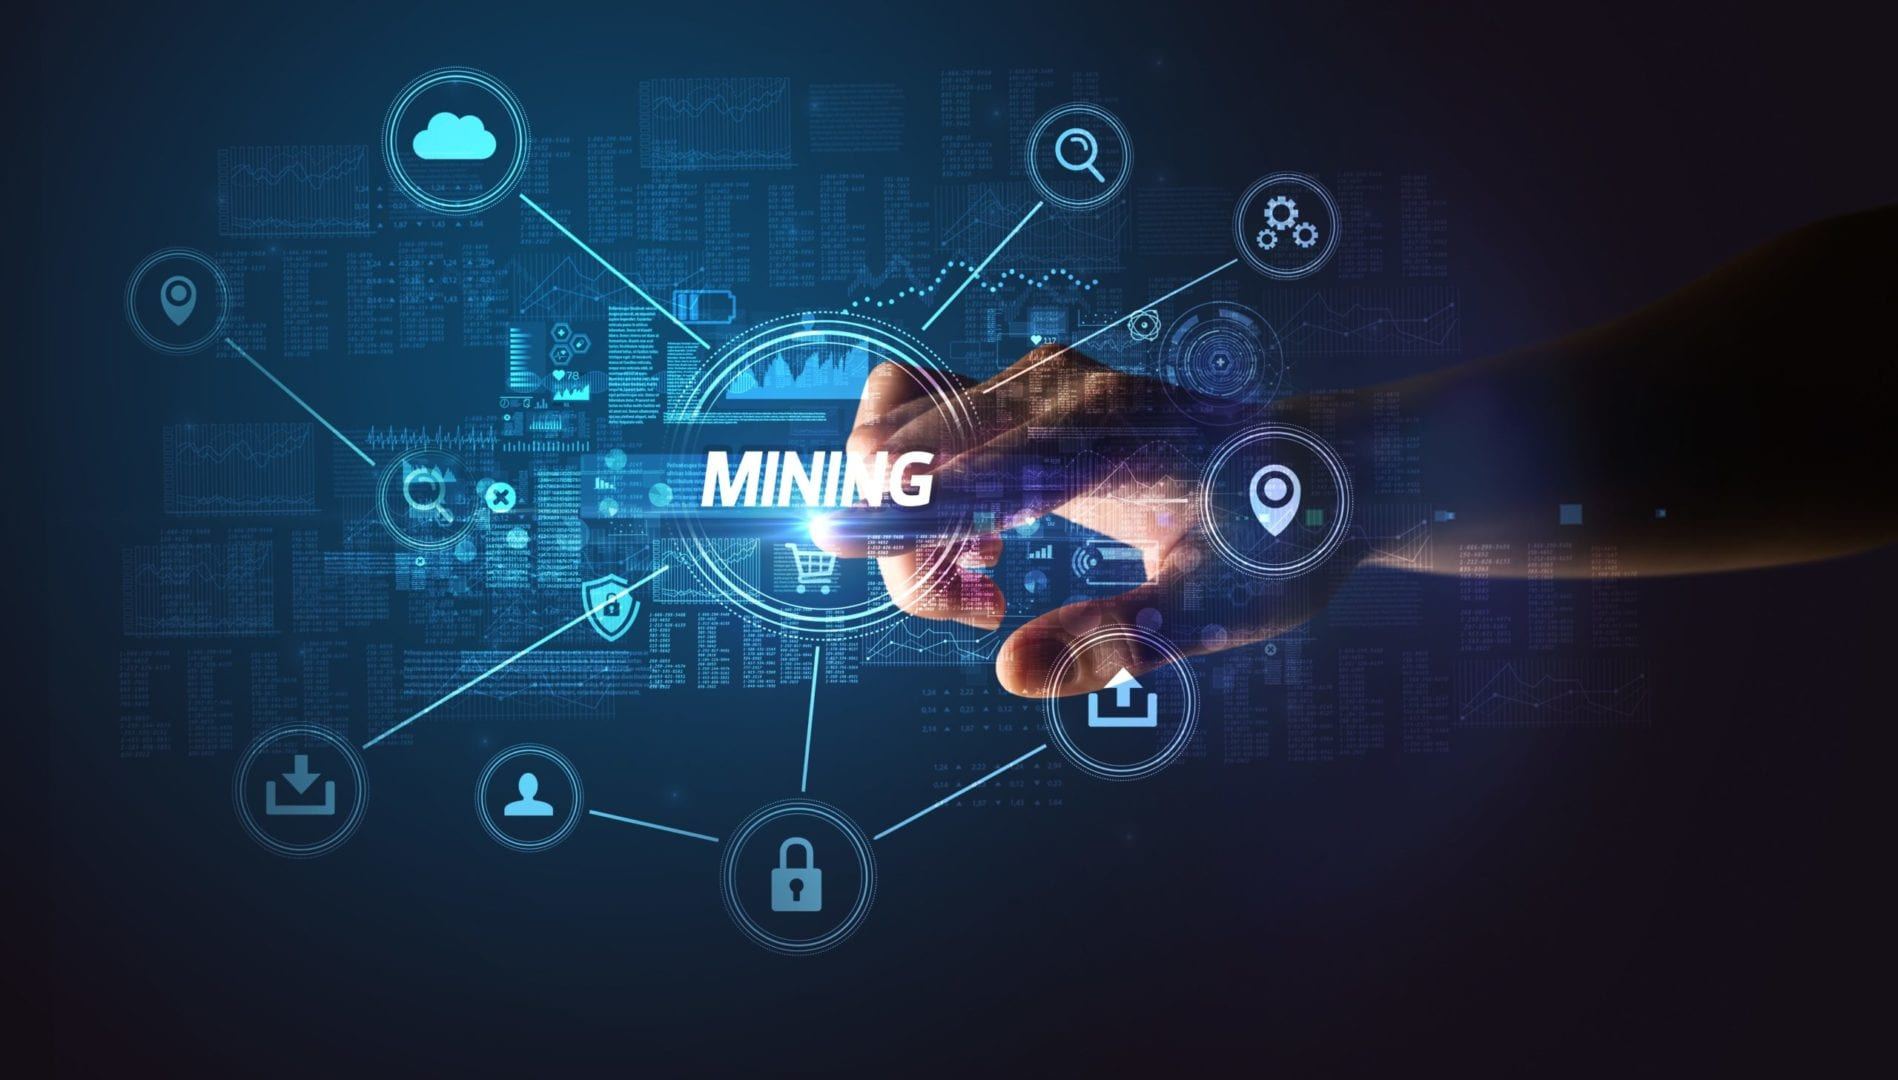 Kazakhstan unveils amount of revenues to government budget from digital mining